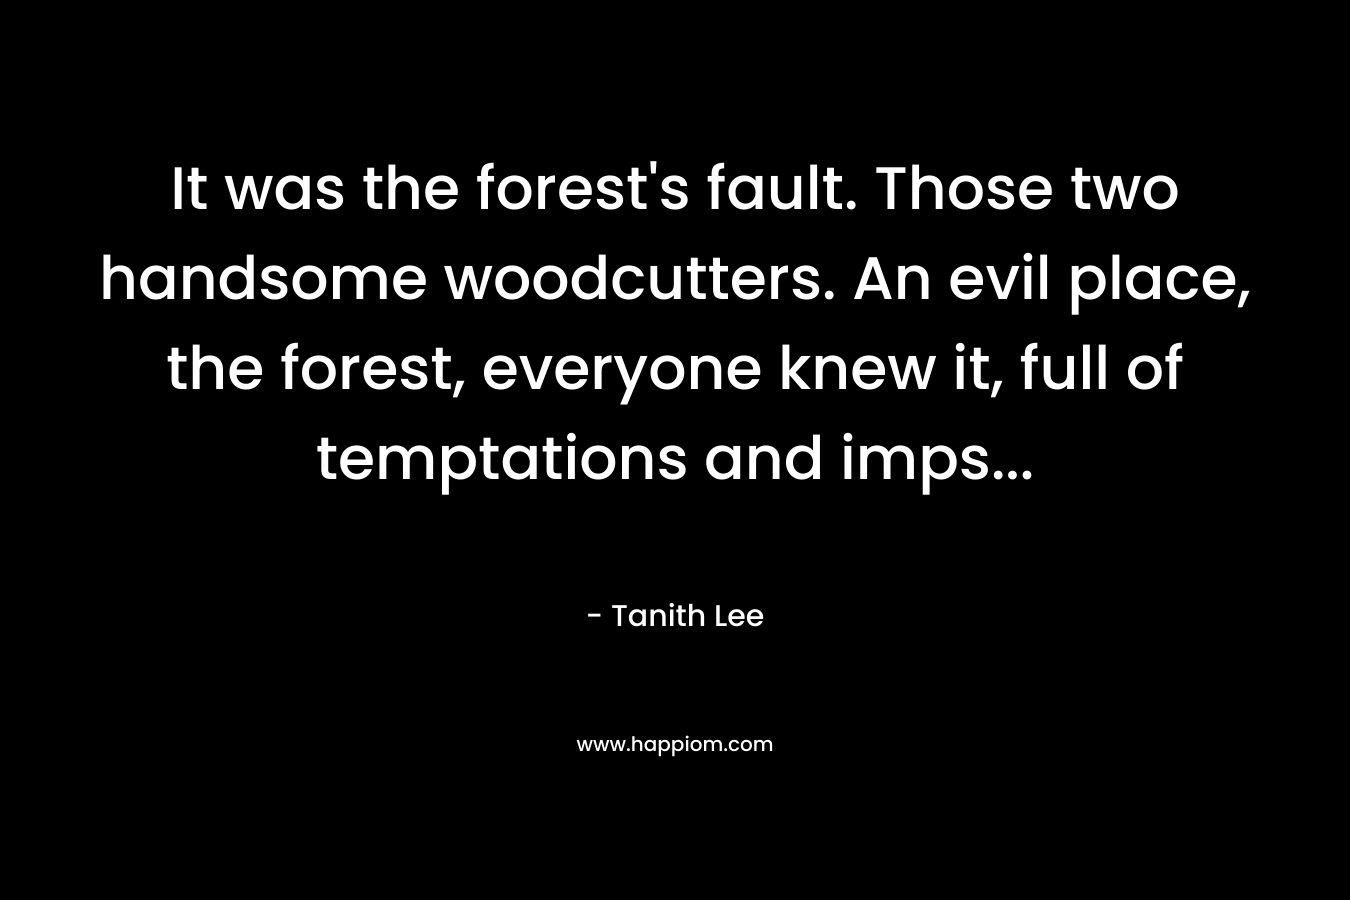 It was the forest’s fault. Those two handsome woodcutters. An evil place, the forest, everyone knew it, full of temptations and imps… – Tanith Lee